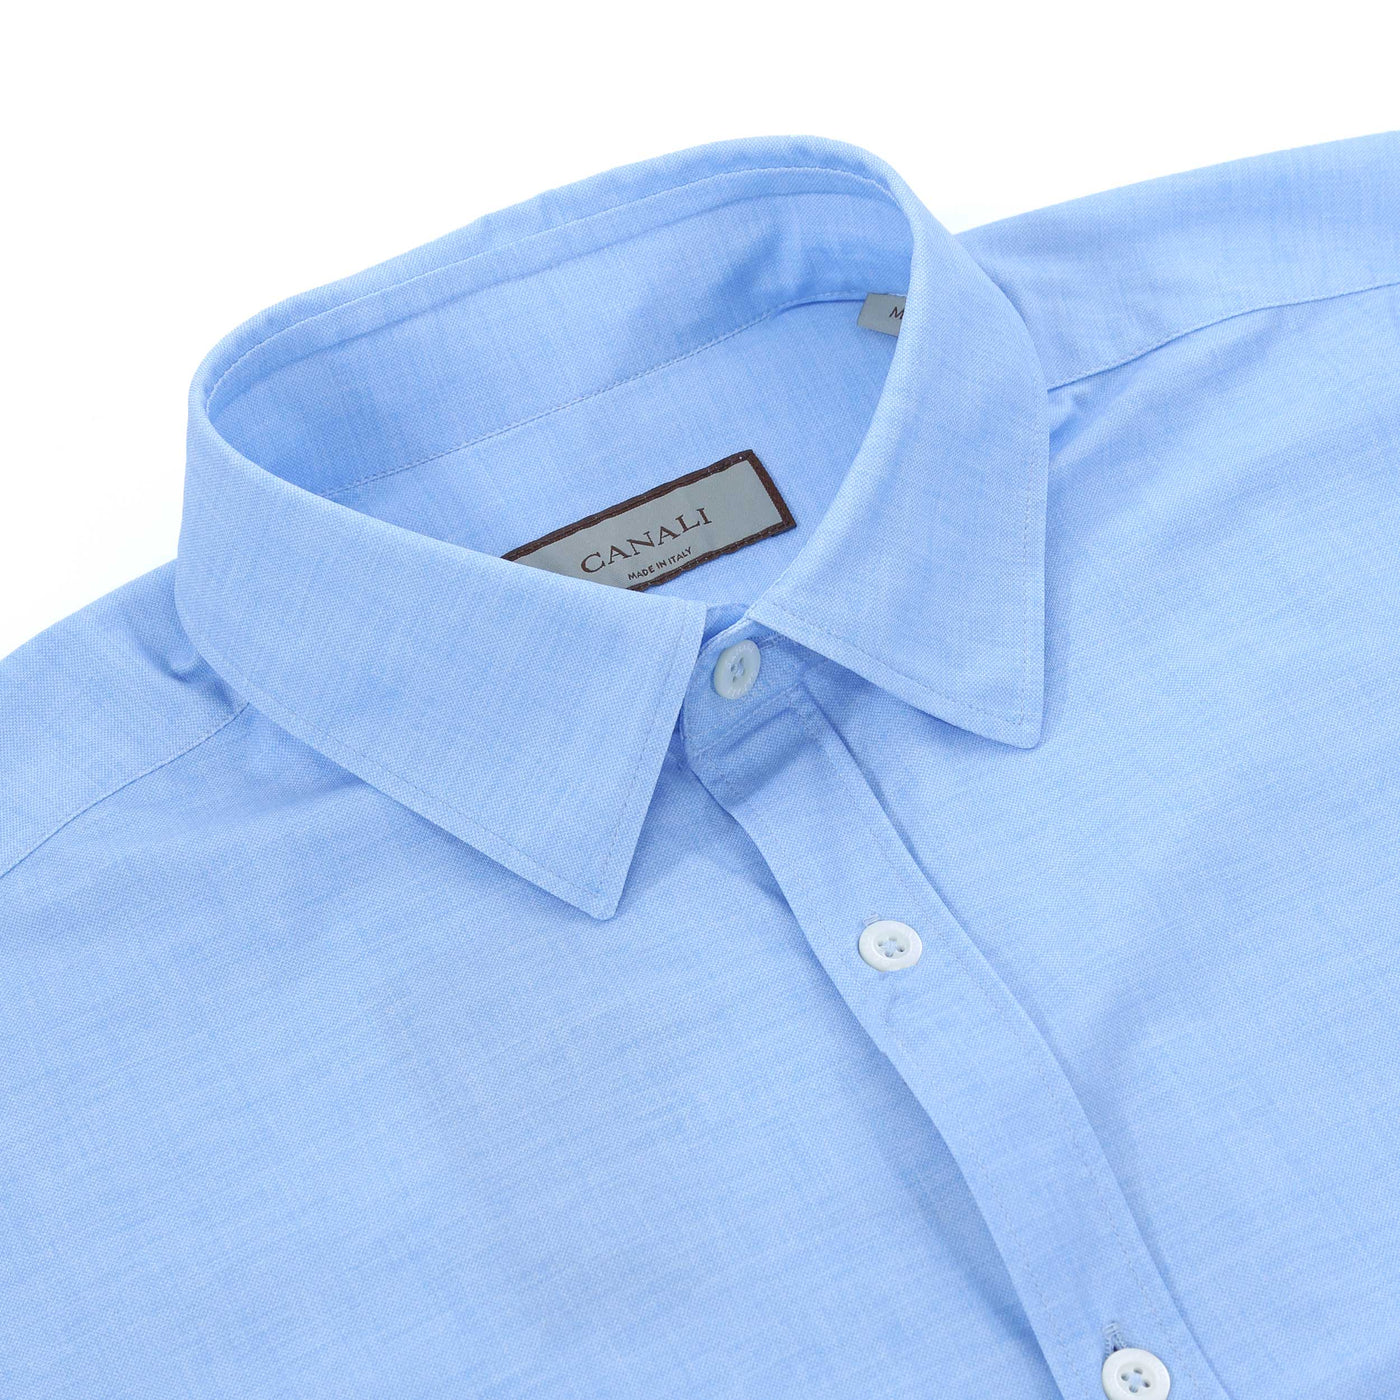 Canali Stretch Polymide Shirt in Sky Blue Collar